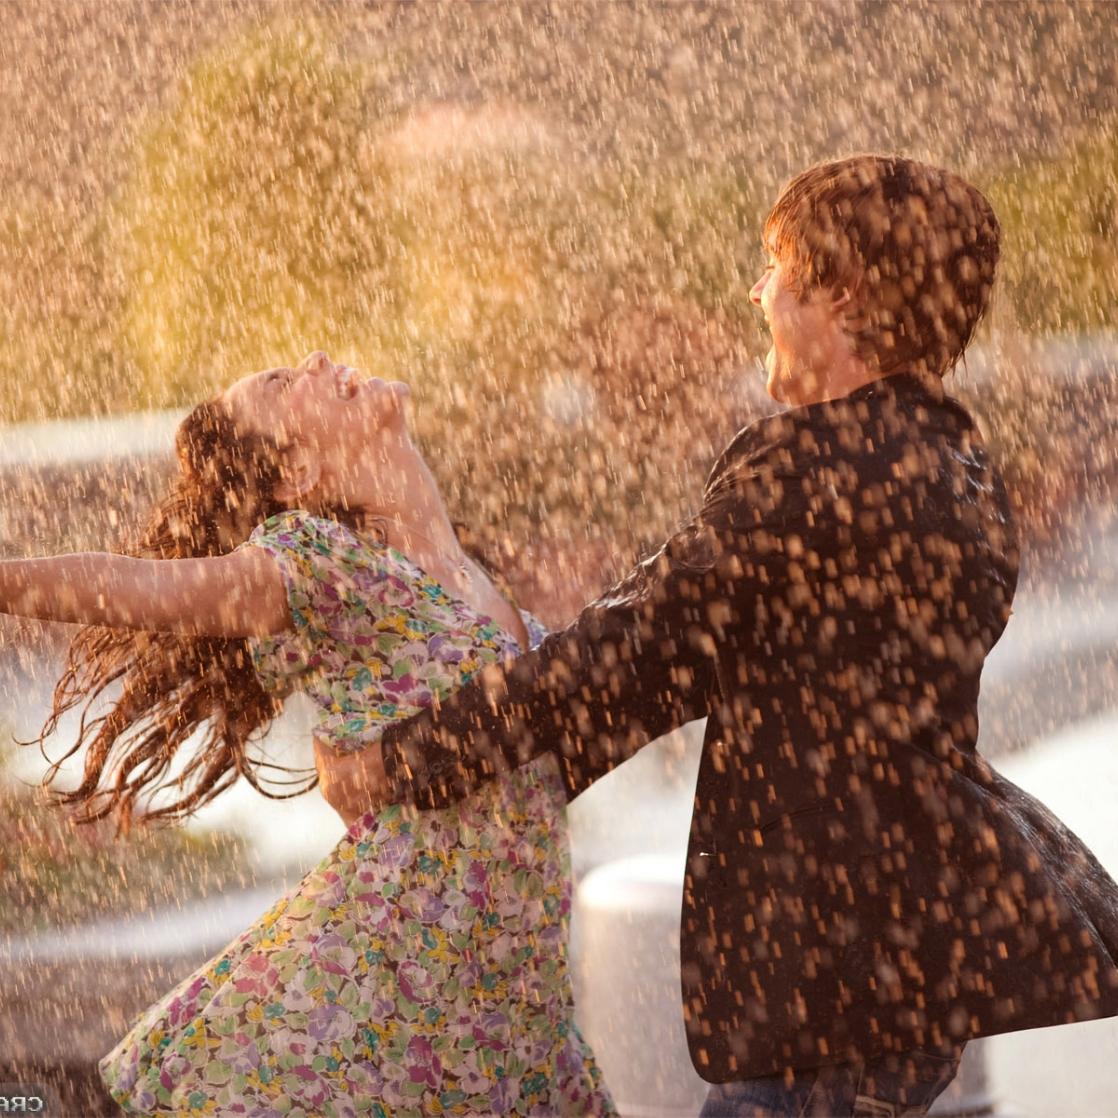 Couple In Rain Images